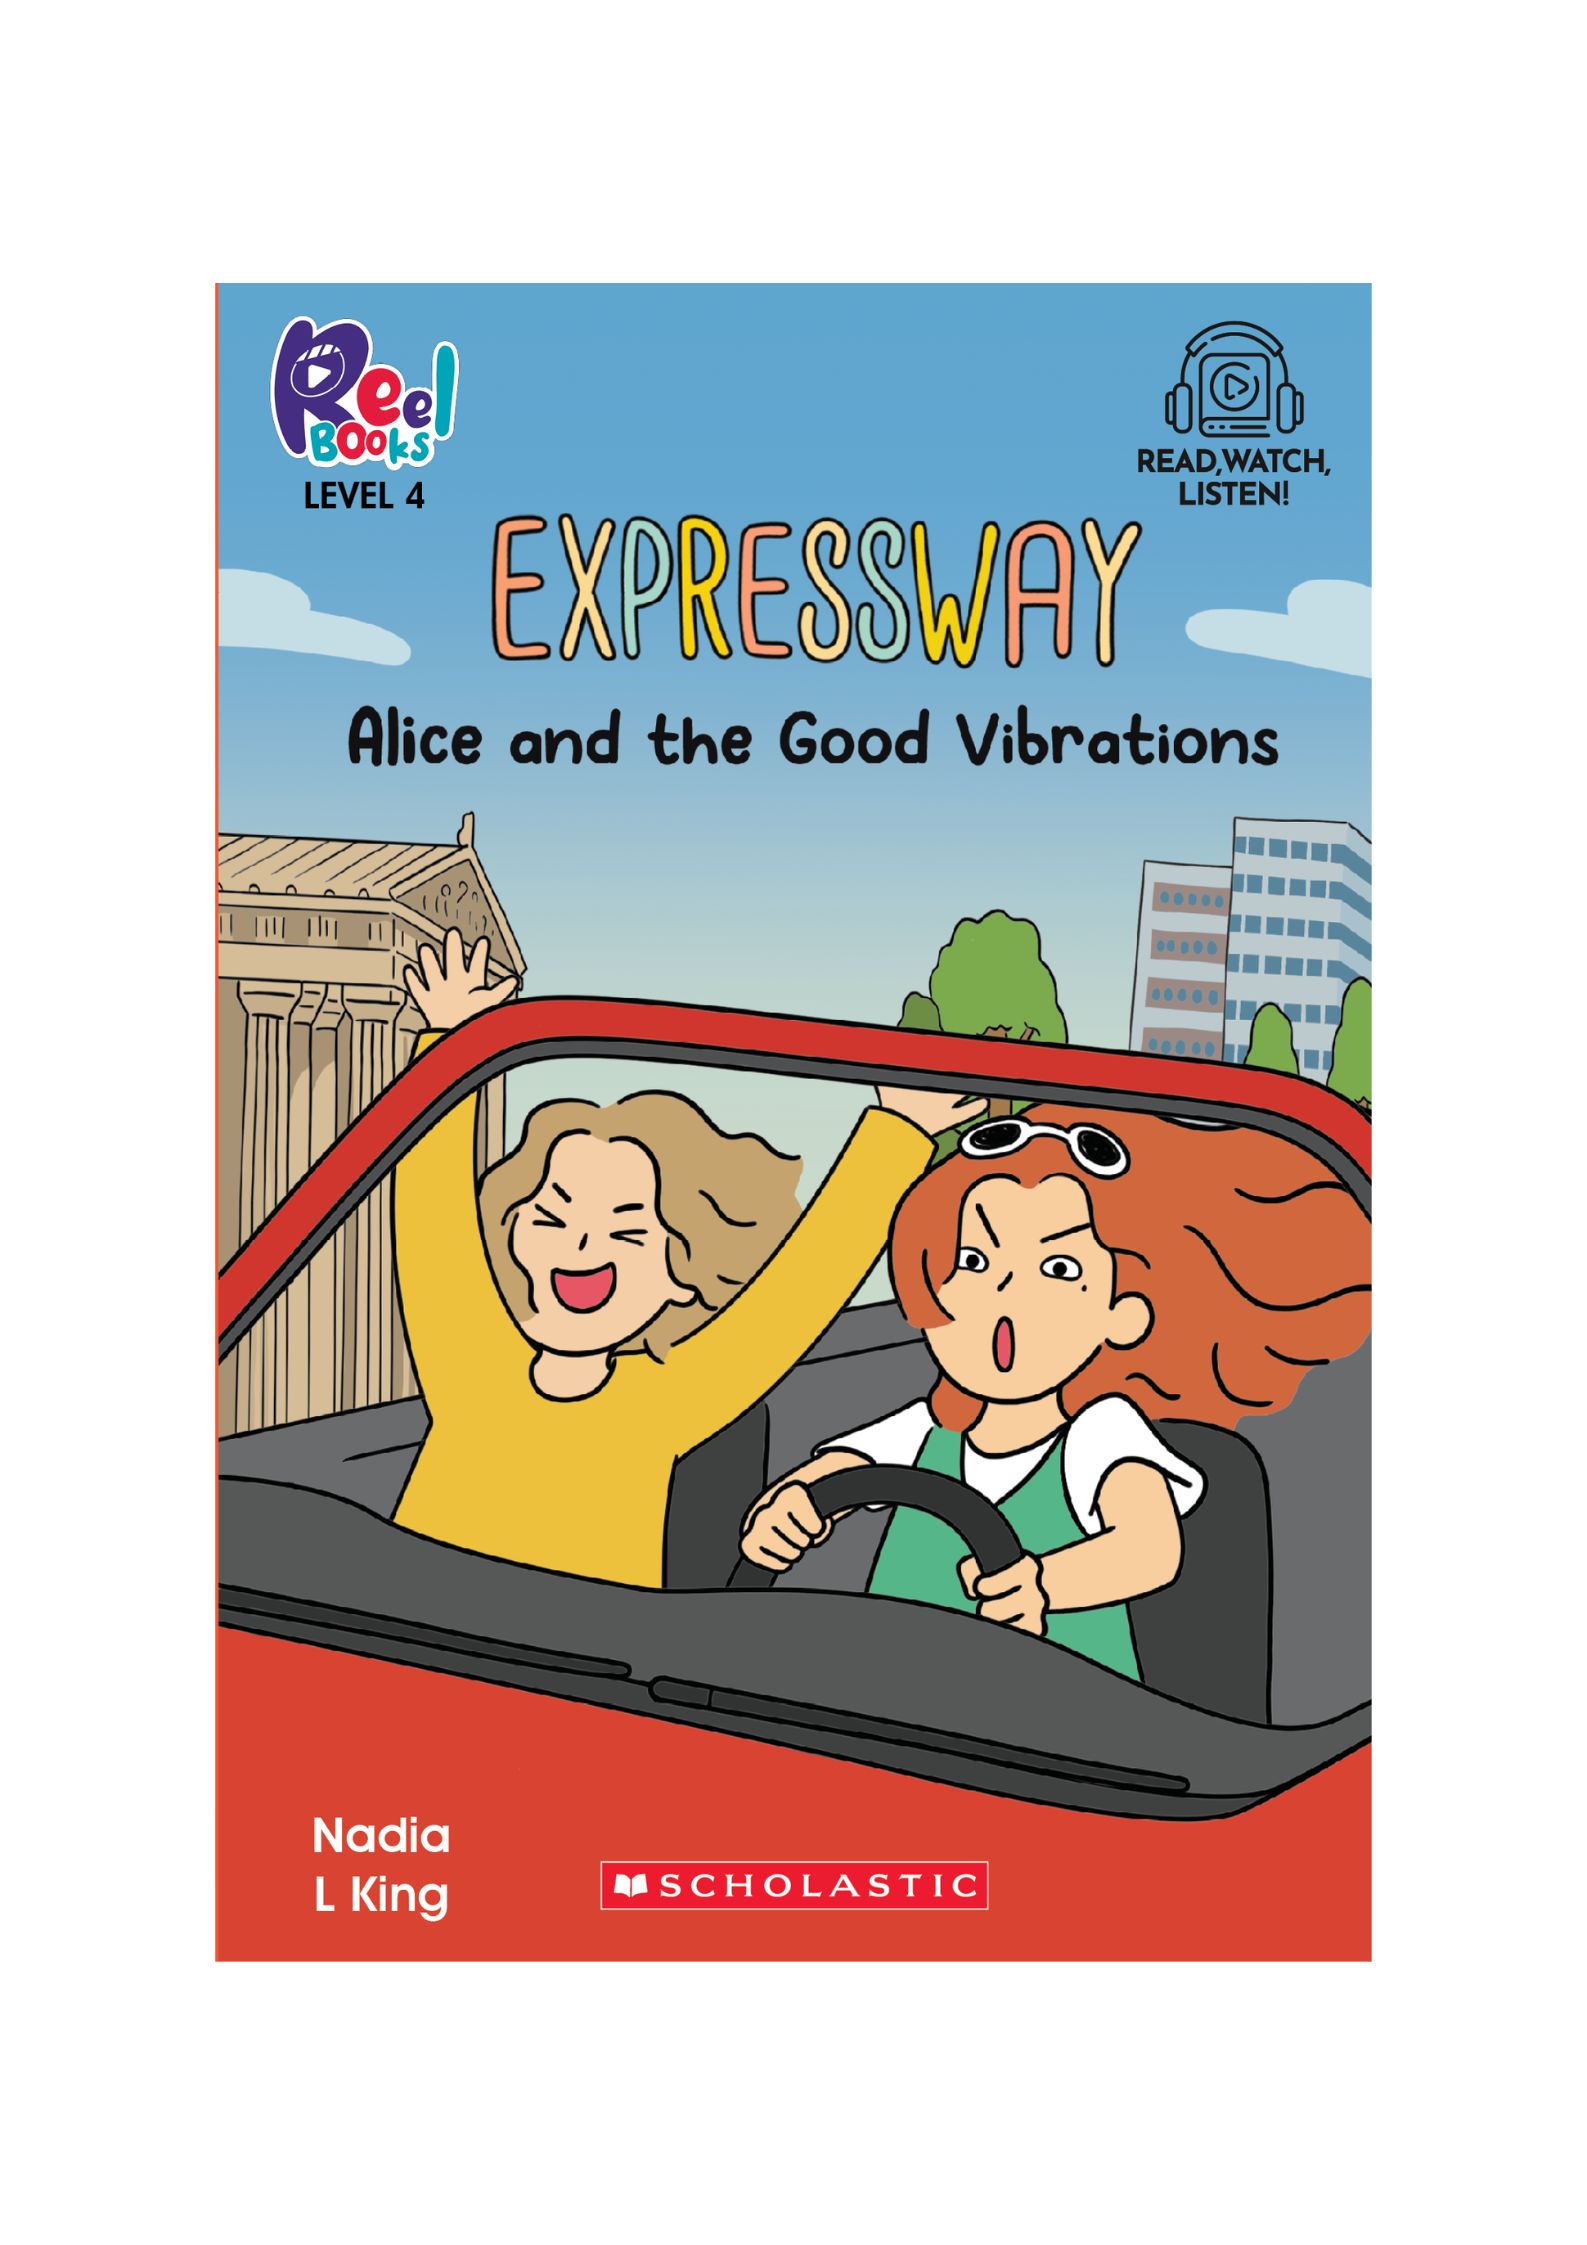 Expressway #2: Alice and the Good Vibrations (KR)